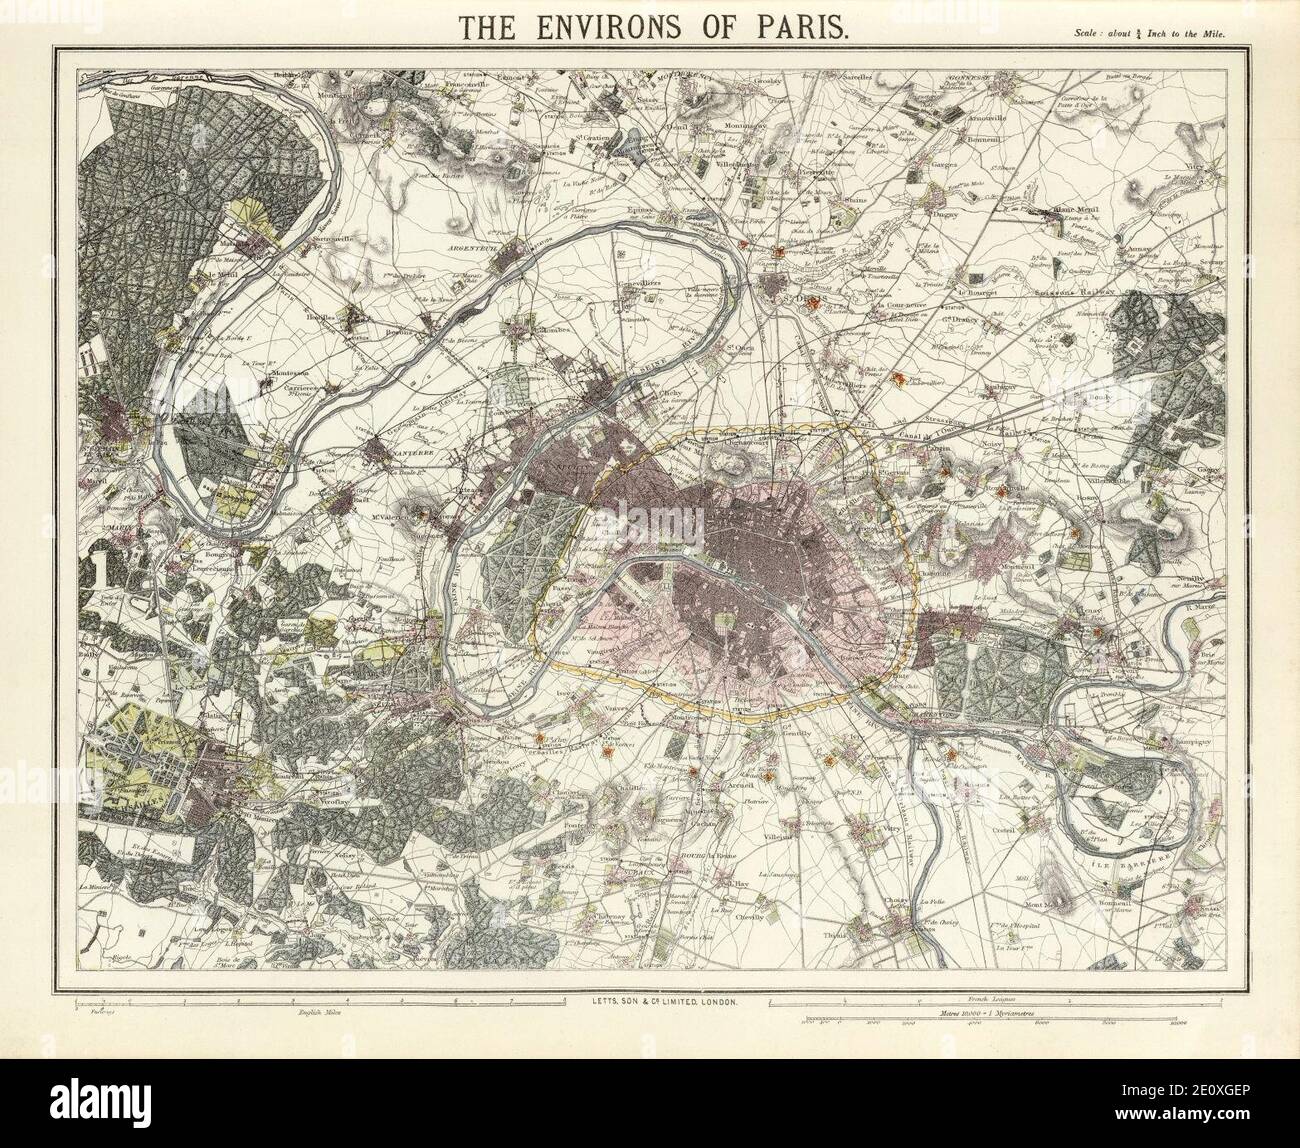 Letts, The environs of Paris, 1883 - David Rumsey. Stock Photo